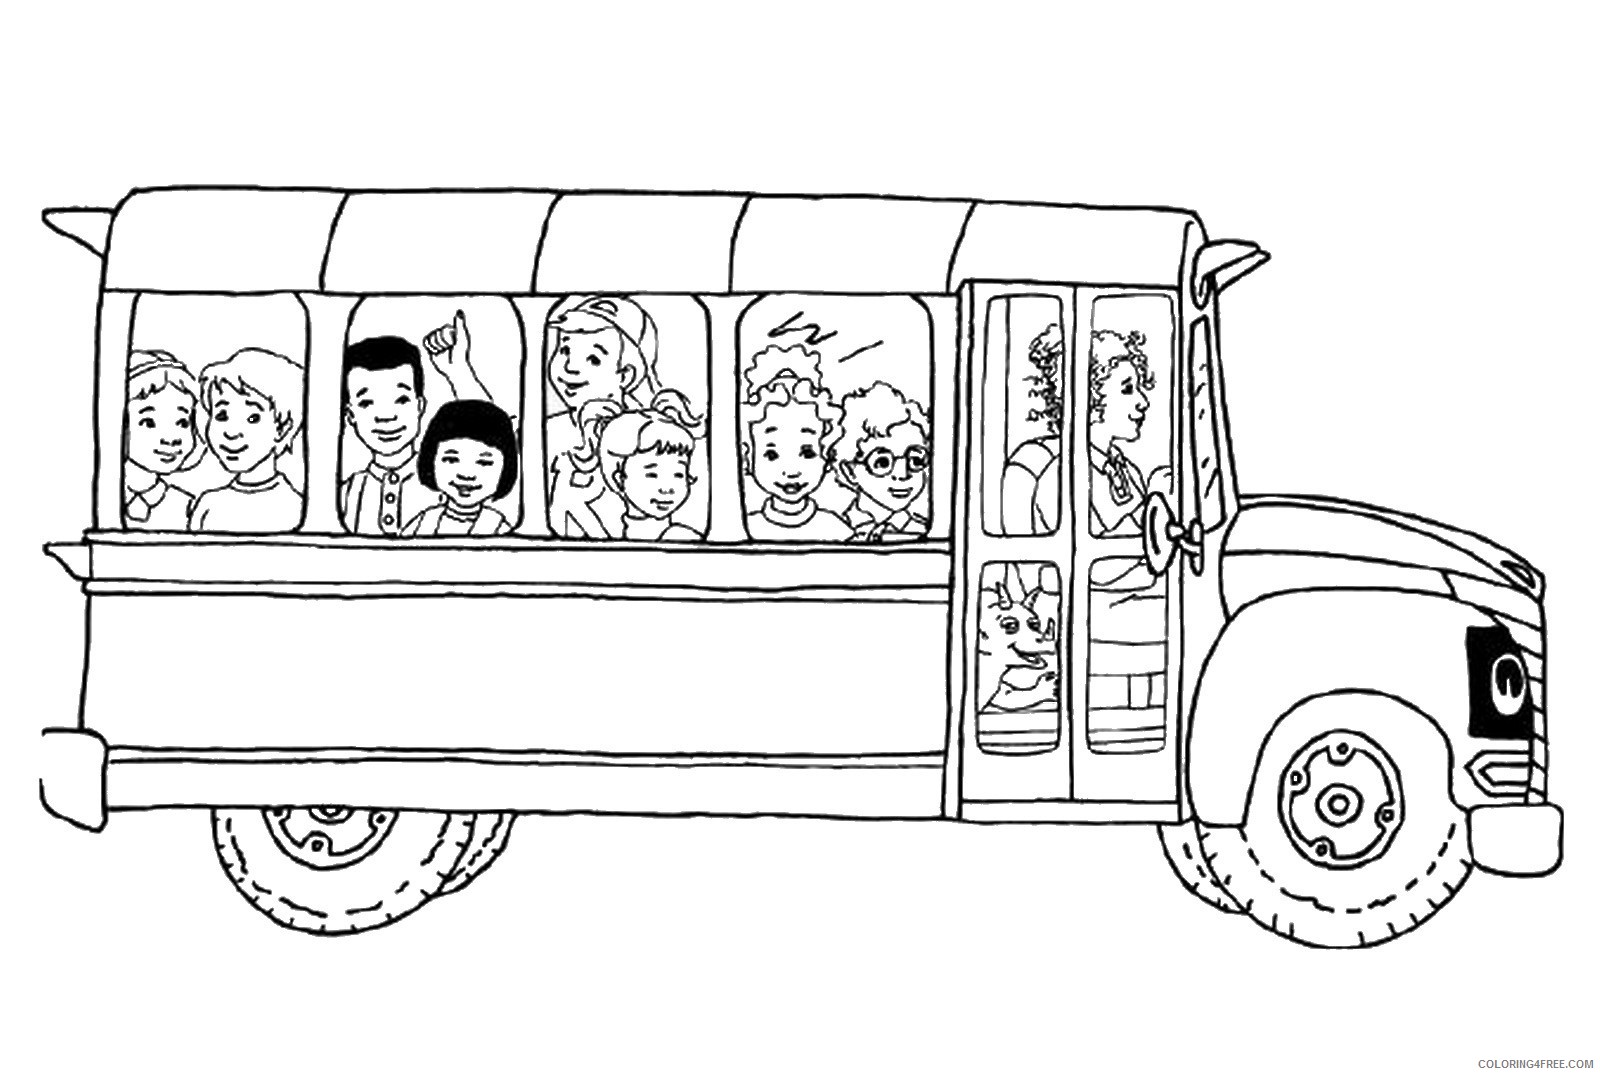 The Magic School Bus Coloring Pages Cartoons magic_school_bus_cl08 Printable 2020 6478 Coloring4free